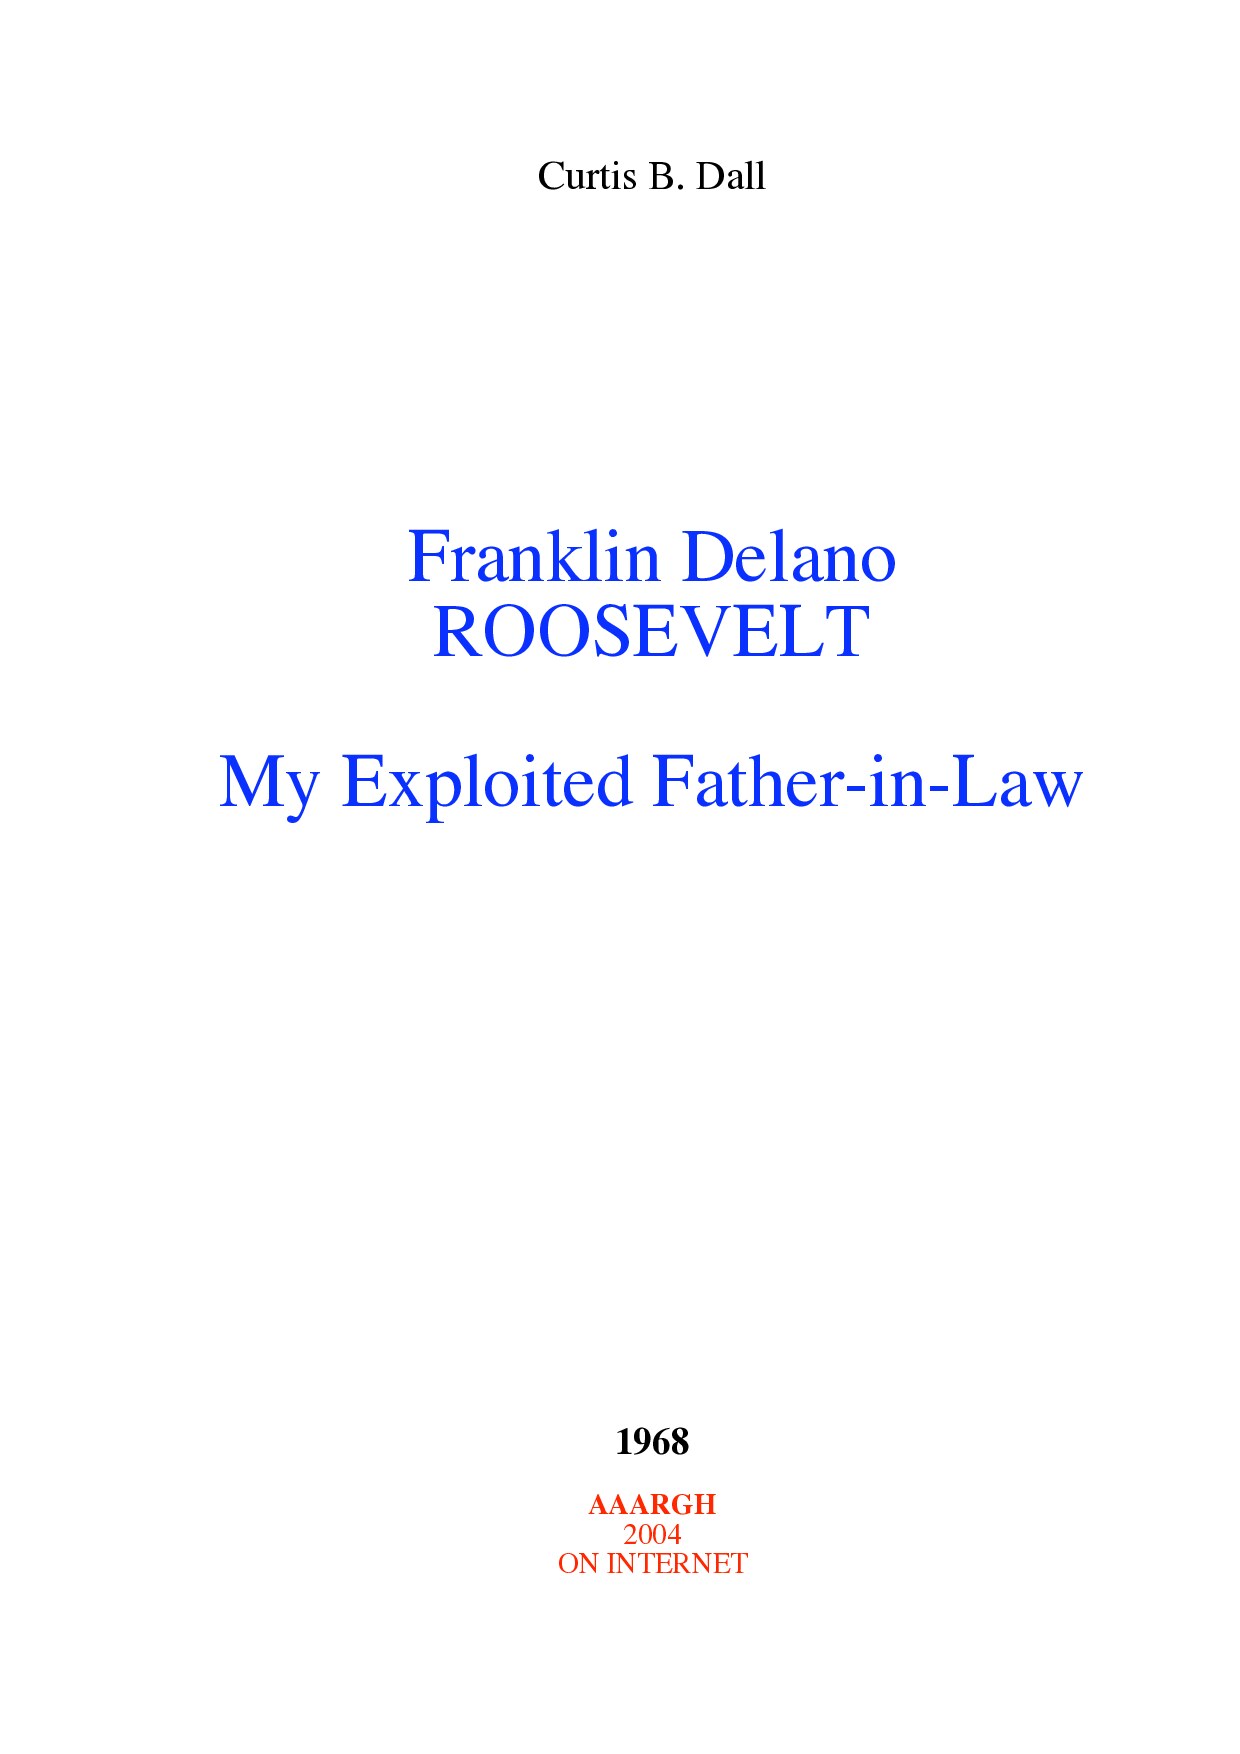 Franklin Delano Roosevelt: My Exploited Father-in-Law